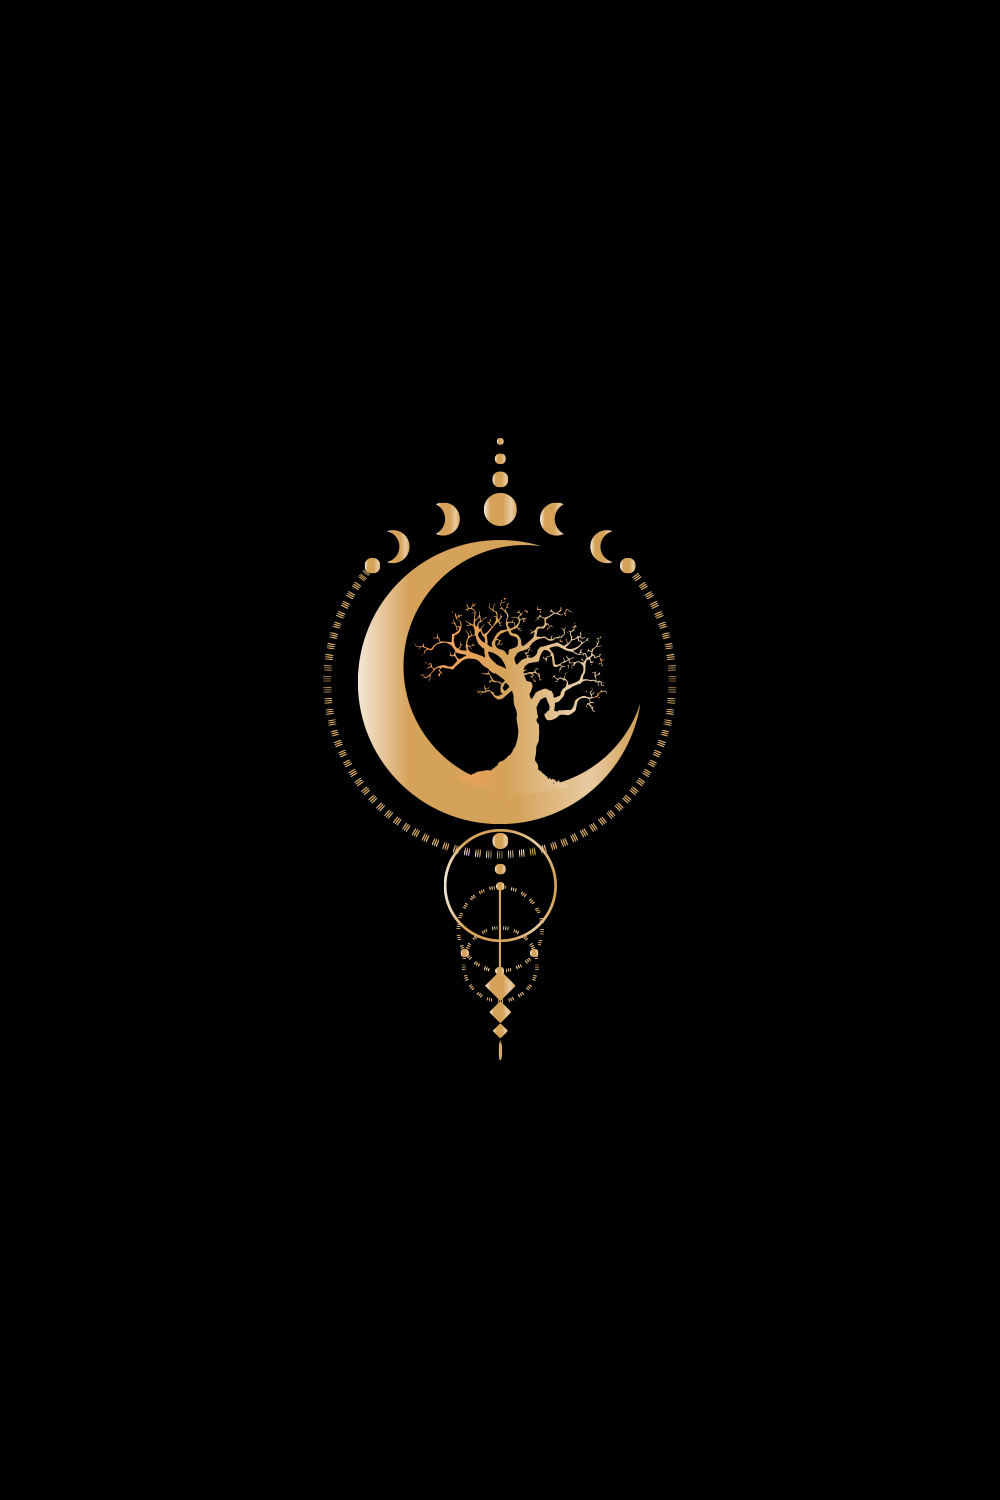 Mystical Moon Phases, tree of life, Sacred geometry Triple moon, half moon pagan Wiccan goddess symbol, gold gradient banner sign, energy circle pinterest preview image.